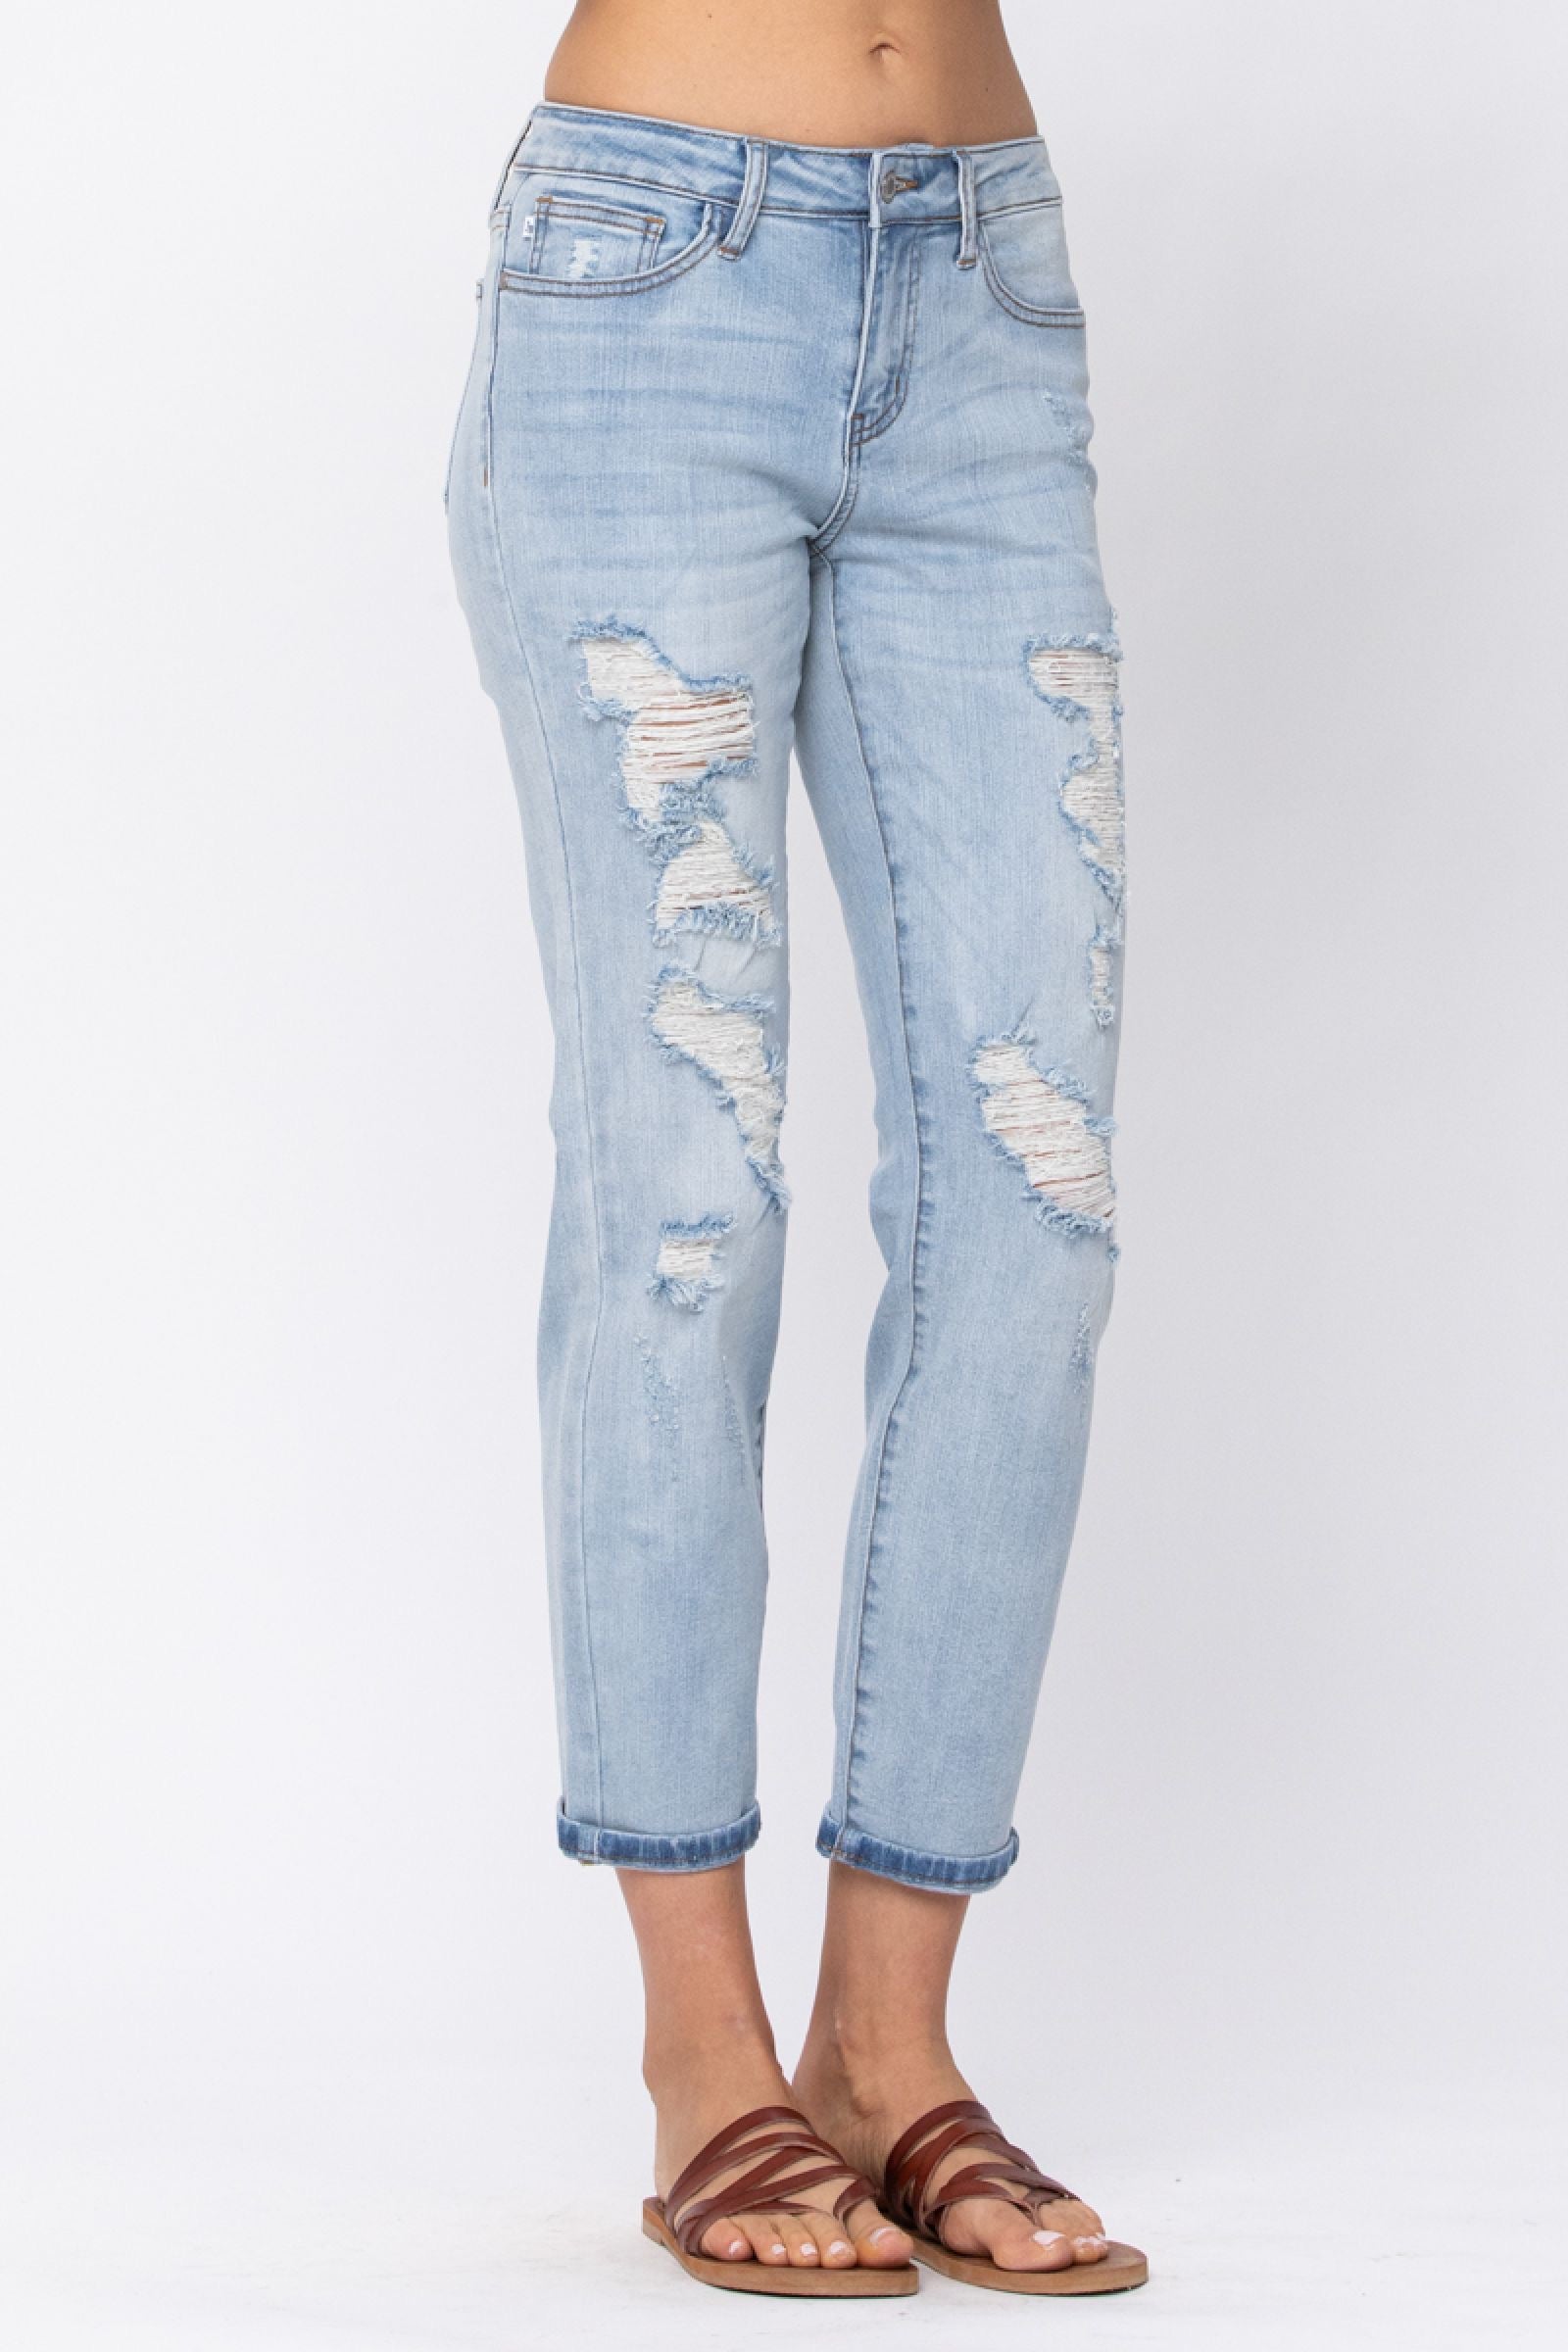 Judy Blue Jeans - Truly Simple Boutique